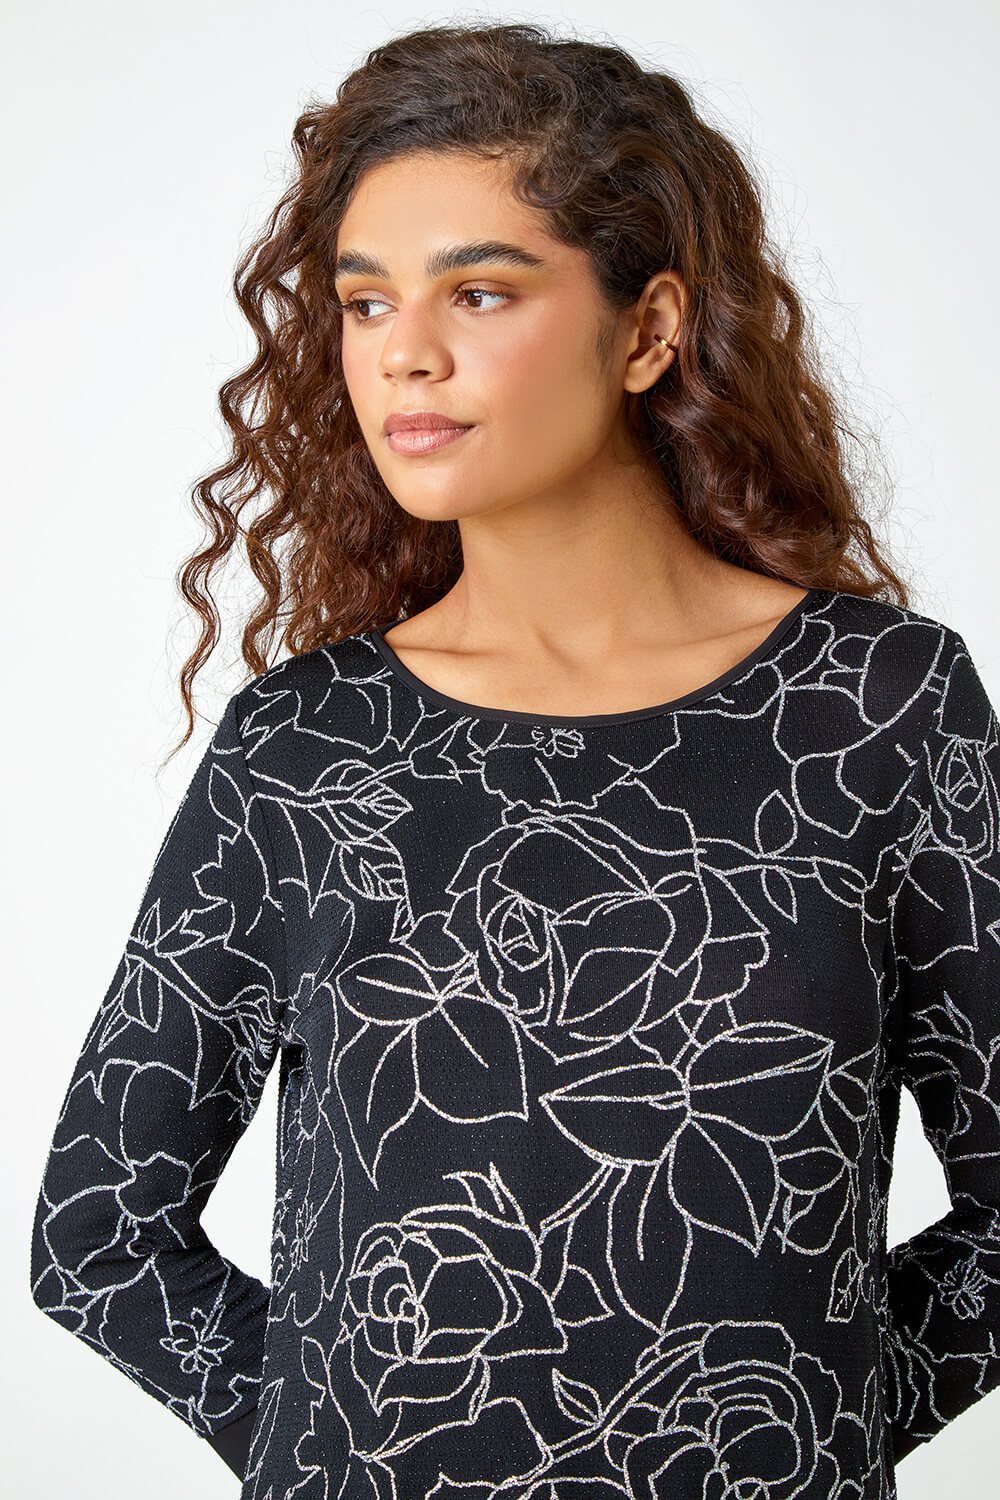 Silver Glitter Rose Print Layered Stretch Top, Image 4 of 5